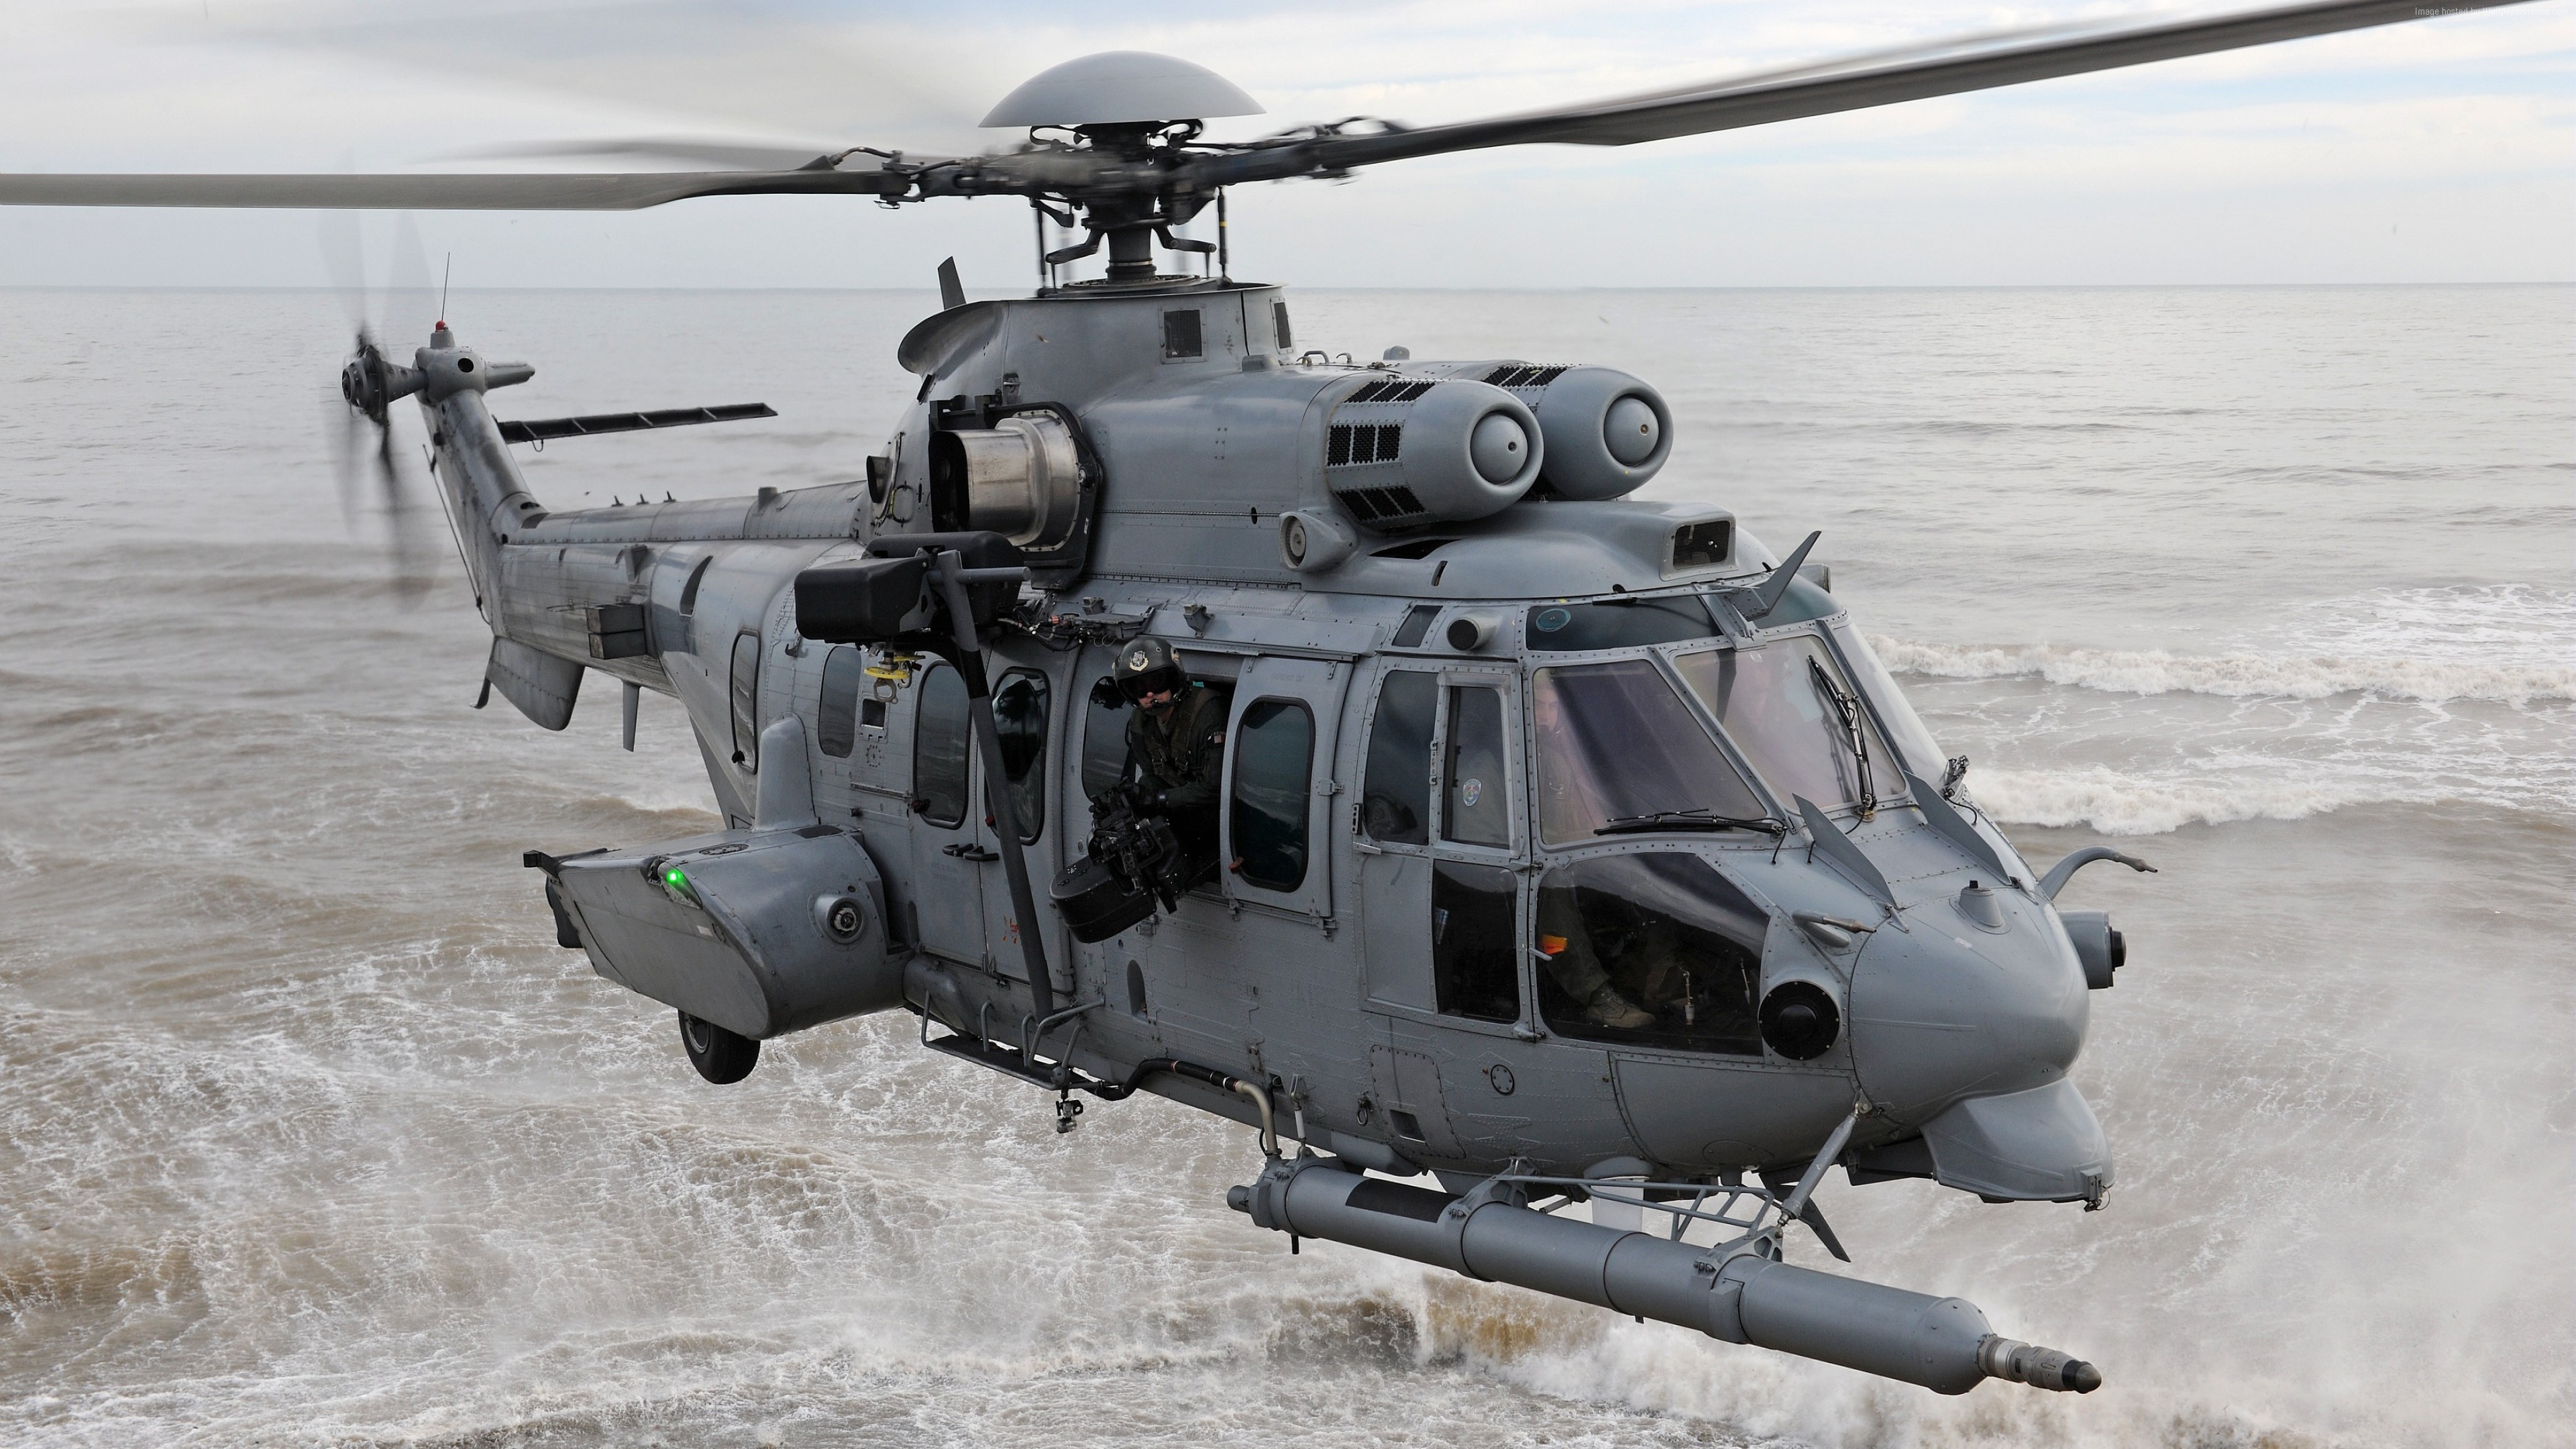 Hd Resolution - Airbus Helicopters H225m , HD Wallpaper & Backgrounds